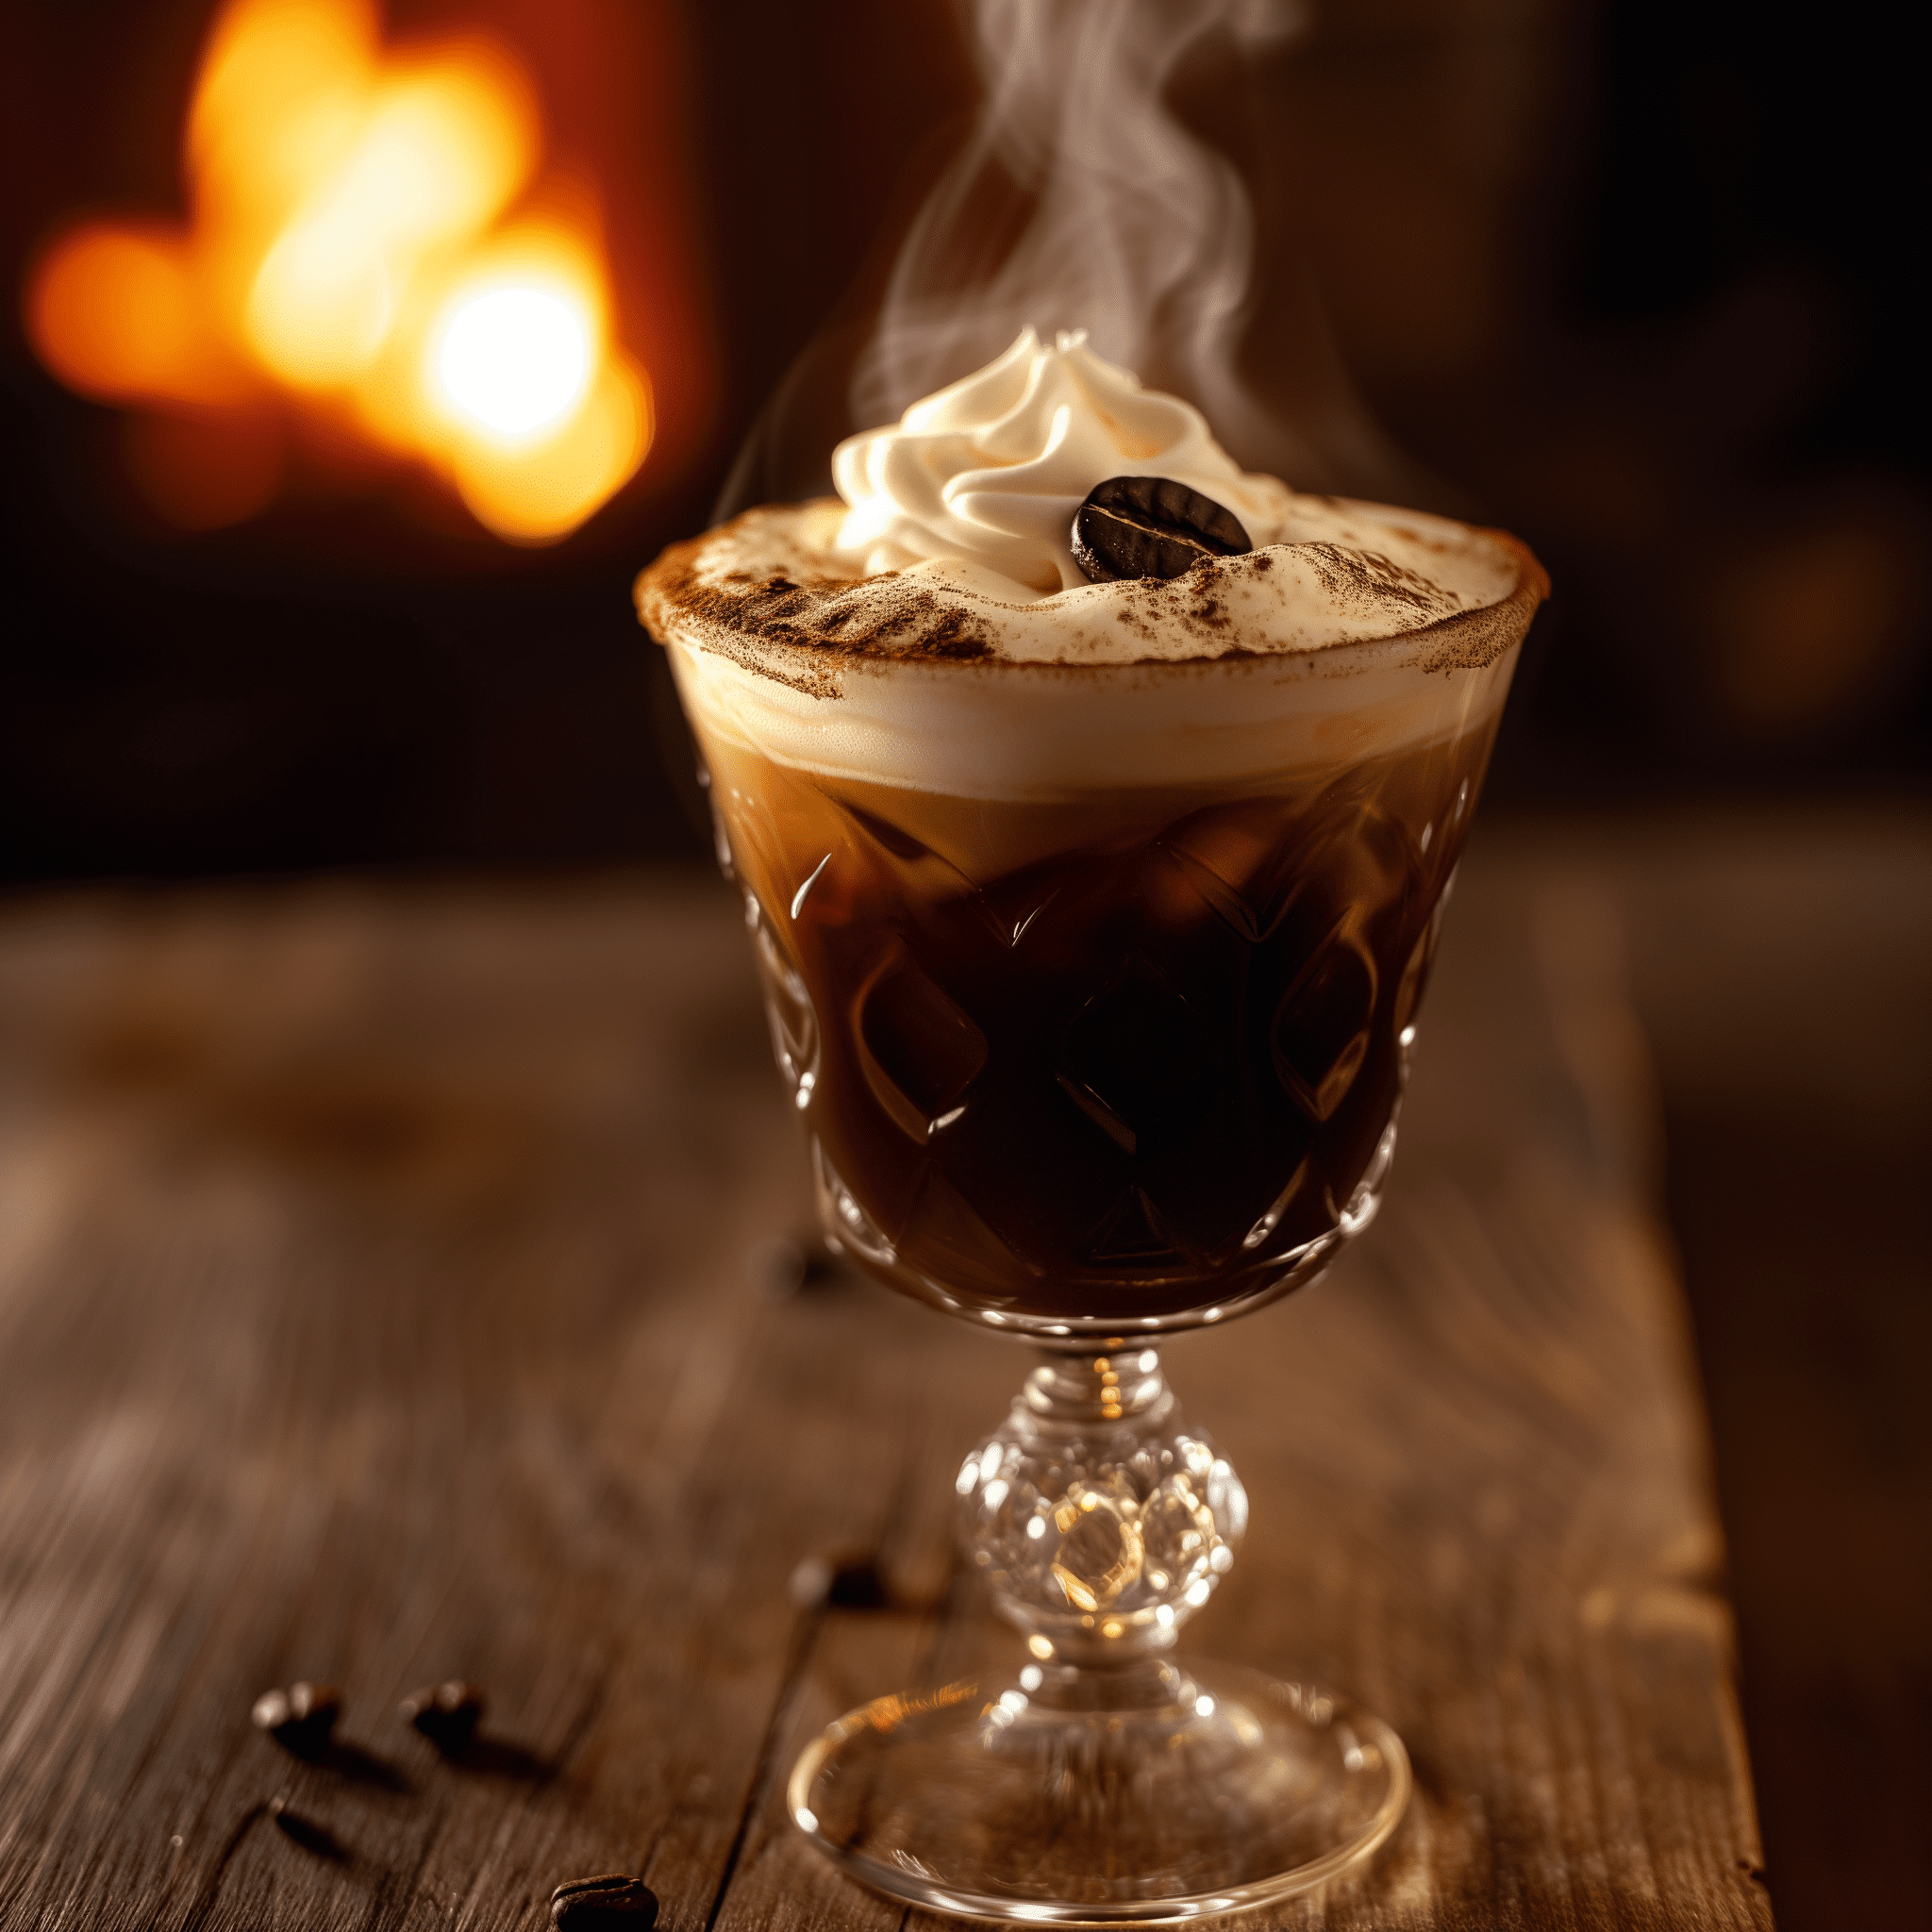 Jamaican Coffee Cocktail Recipe - Jamaican Coffee offers a complex taste profile. It's rich and robust from the brewed coffee, sweet and slightly spicy from the dark rum, and has a velvety smoothness from the coffee liqueur. The whipped cream adds a luxurious creaminess, and the chocolate covered coffee bean provides a delightful crunch and an extra kick of coffee flavor.